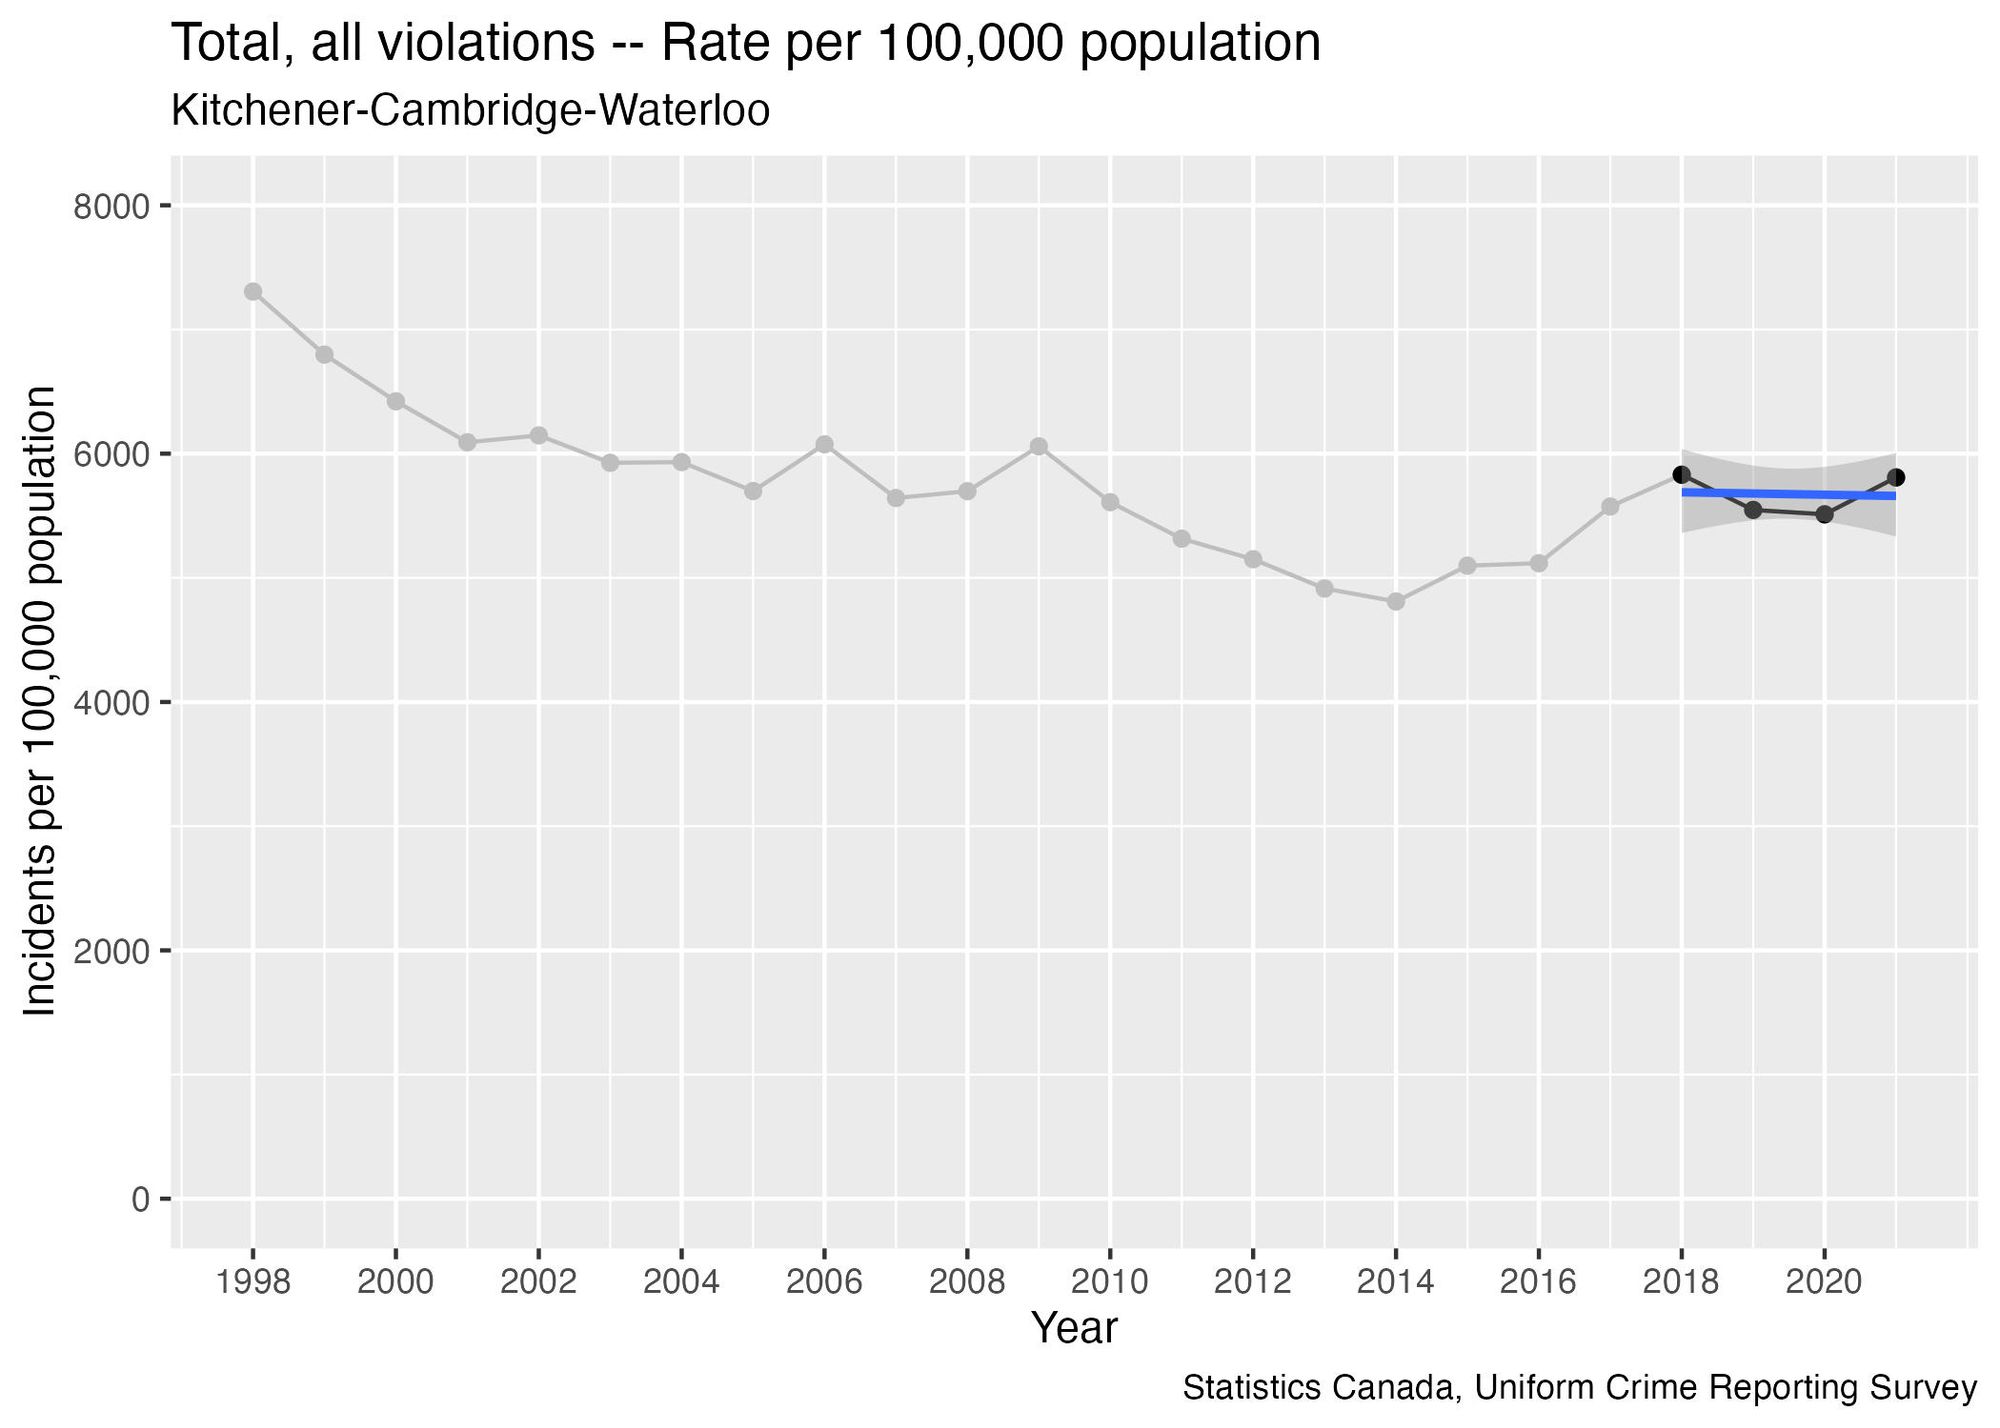 A graph of "Total, all violations - rate per 100,000 population" for Kitchener-Cambridge-Waterloo, between 1998 and 2021. Points from 1998 to 2017 have been greyed-out. The trend line on the years 2018 to 2021 is flat.